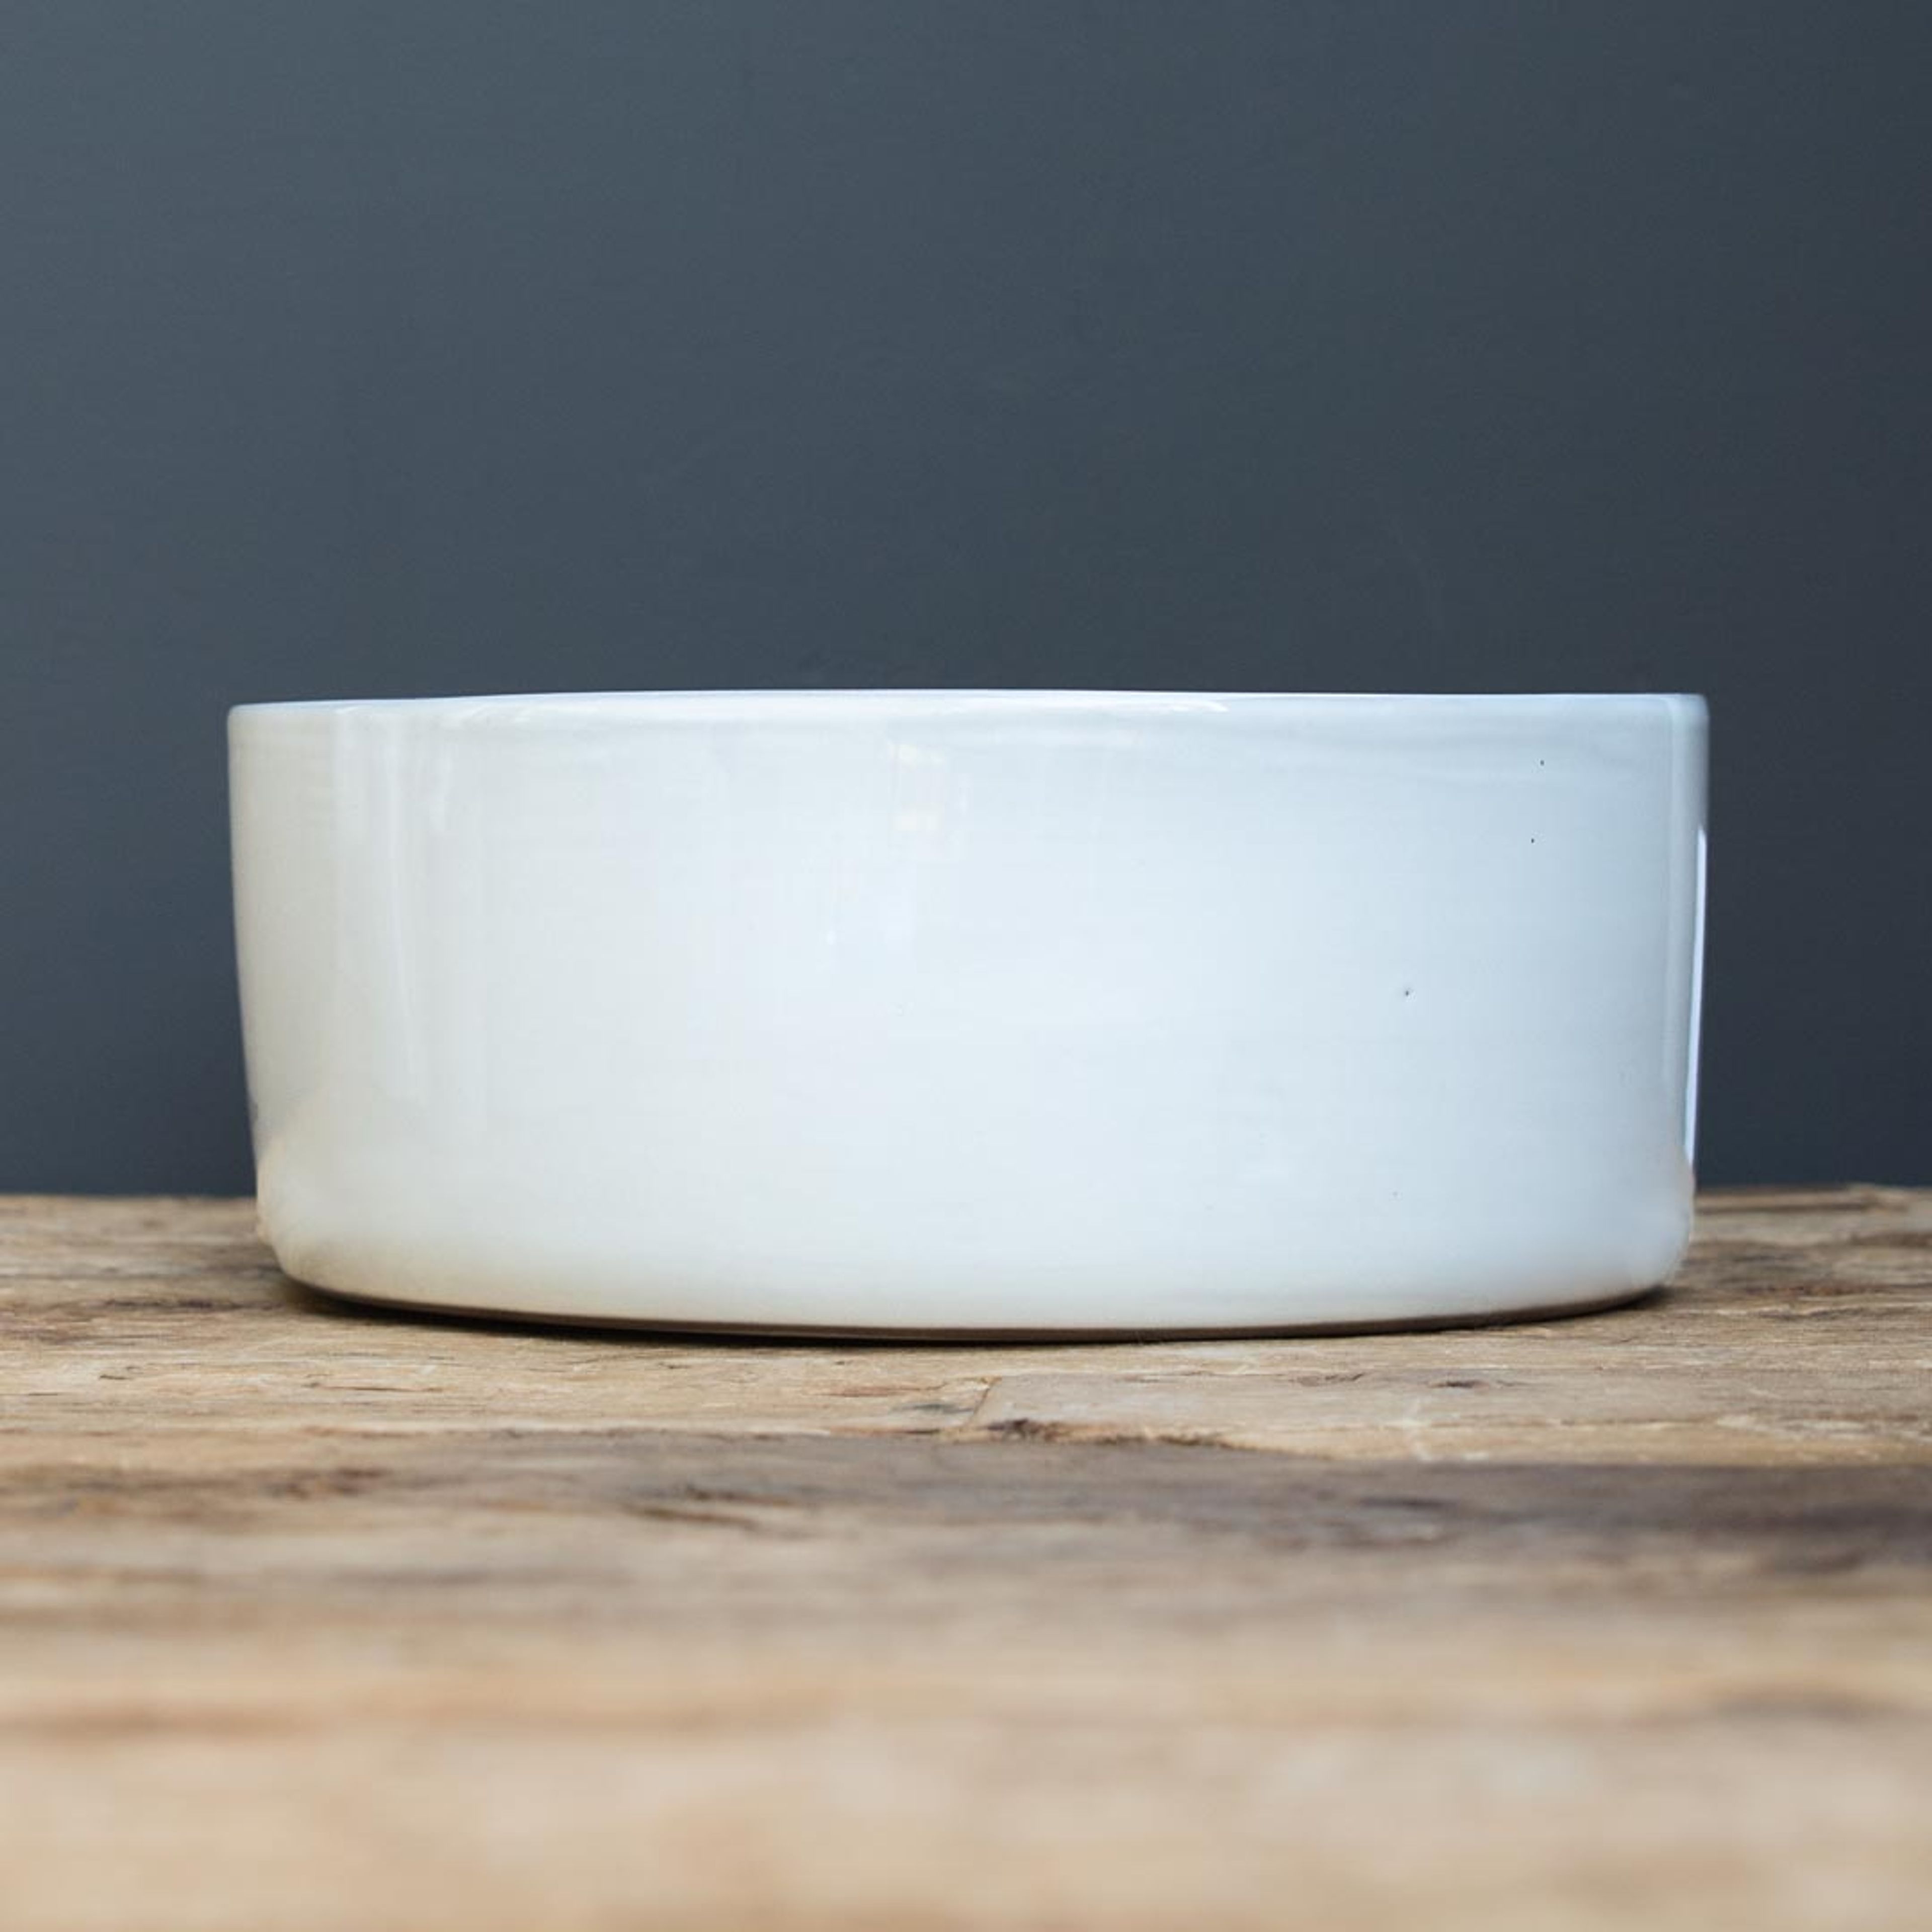 Pacifica Serving Bowl